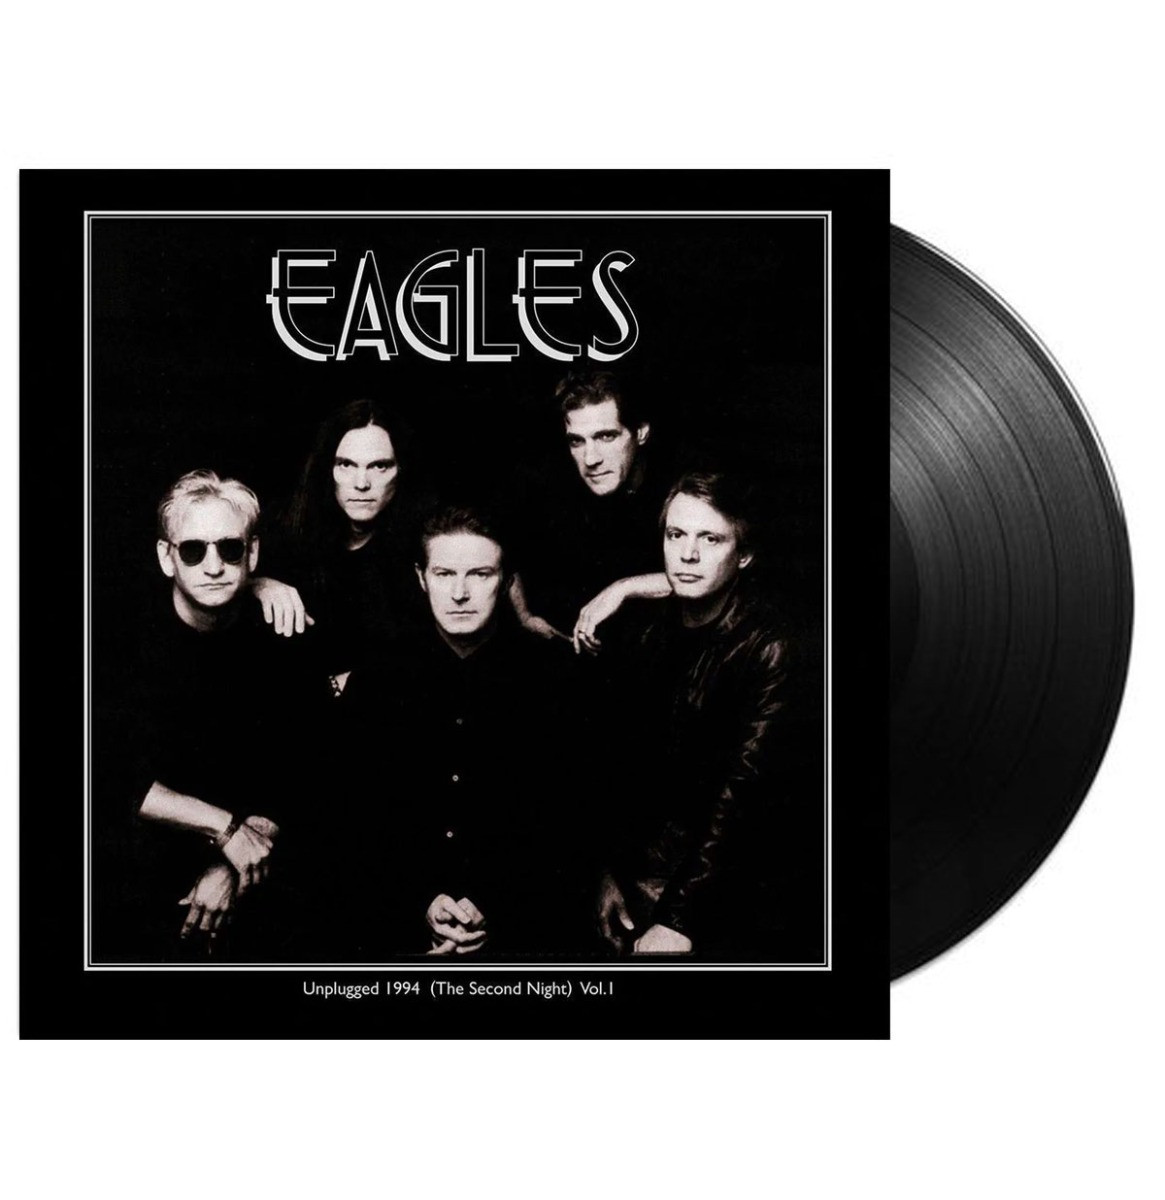 Eagles - Unplugged 1994 (The Second Night) Vol.1 2LP